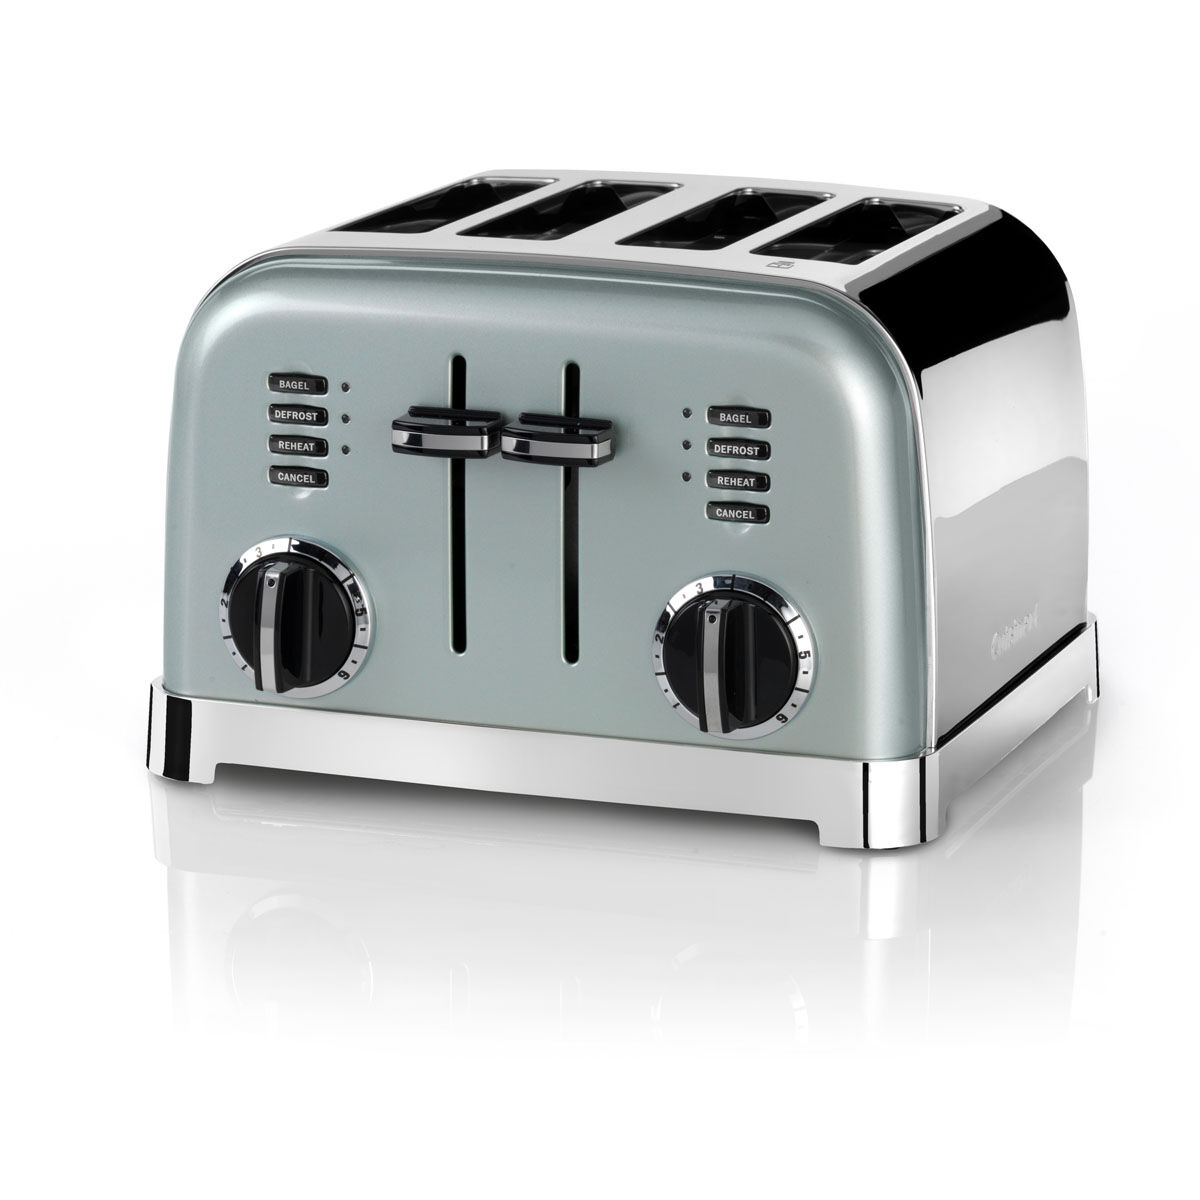 Cuisinart Cuisinart CPT160SU 2 Slice Toaster Silver With 6 Toasting Levels Grade C 3030058101609 